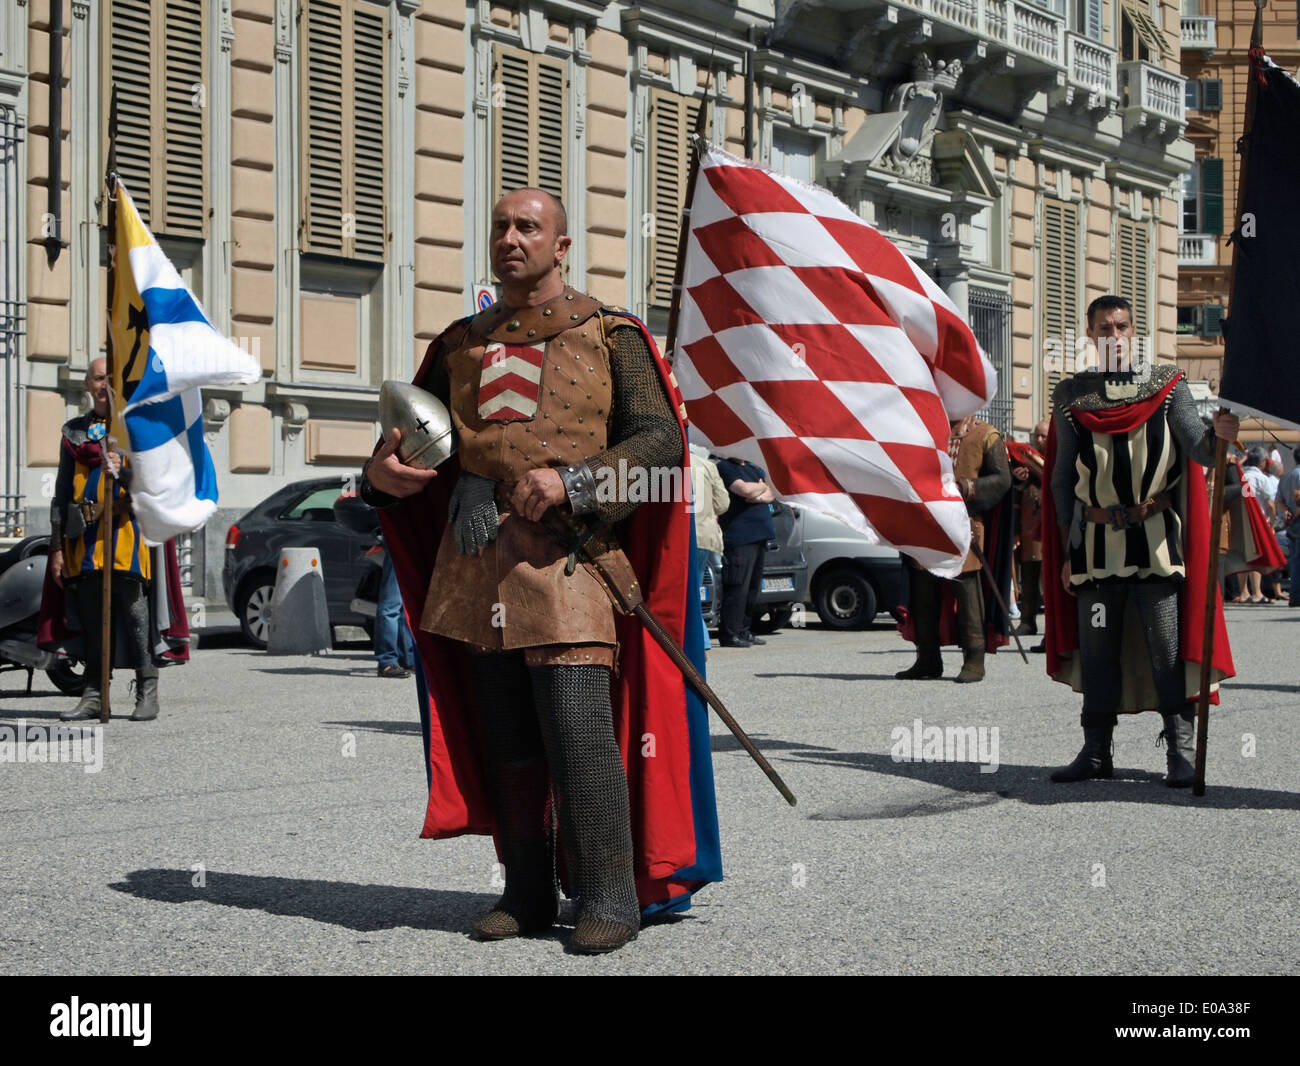 procession with historical costumes in Genoa during the 4 maritime republics regatta - Italy Stock Photo